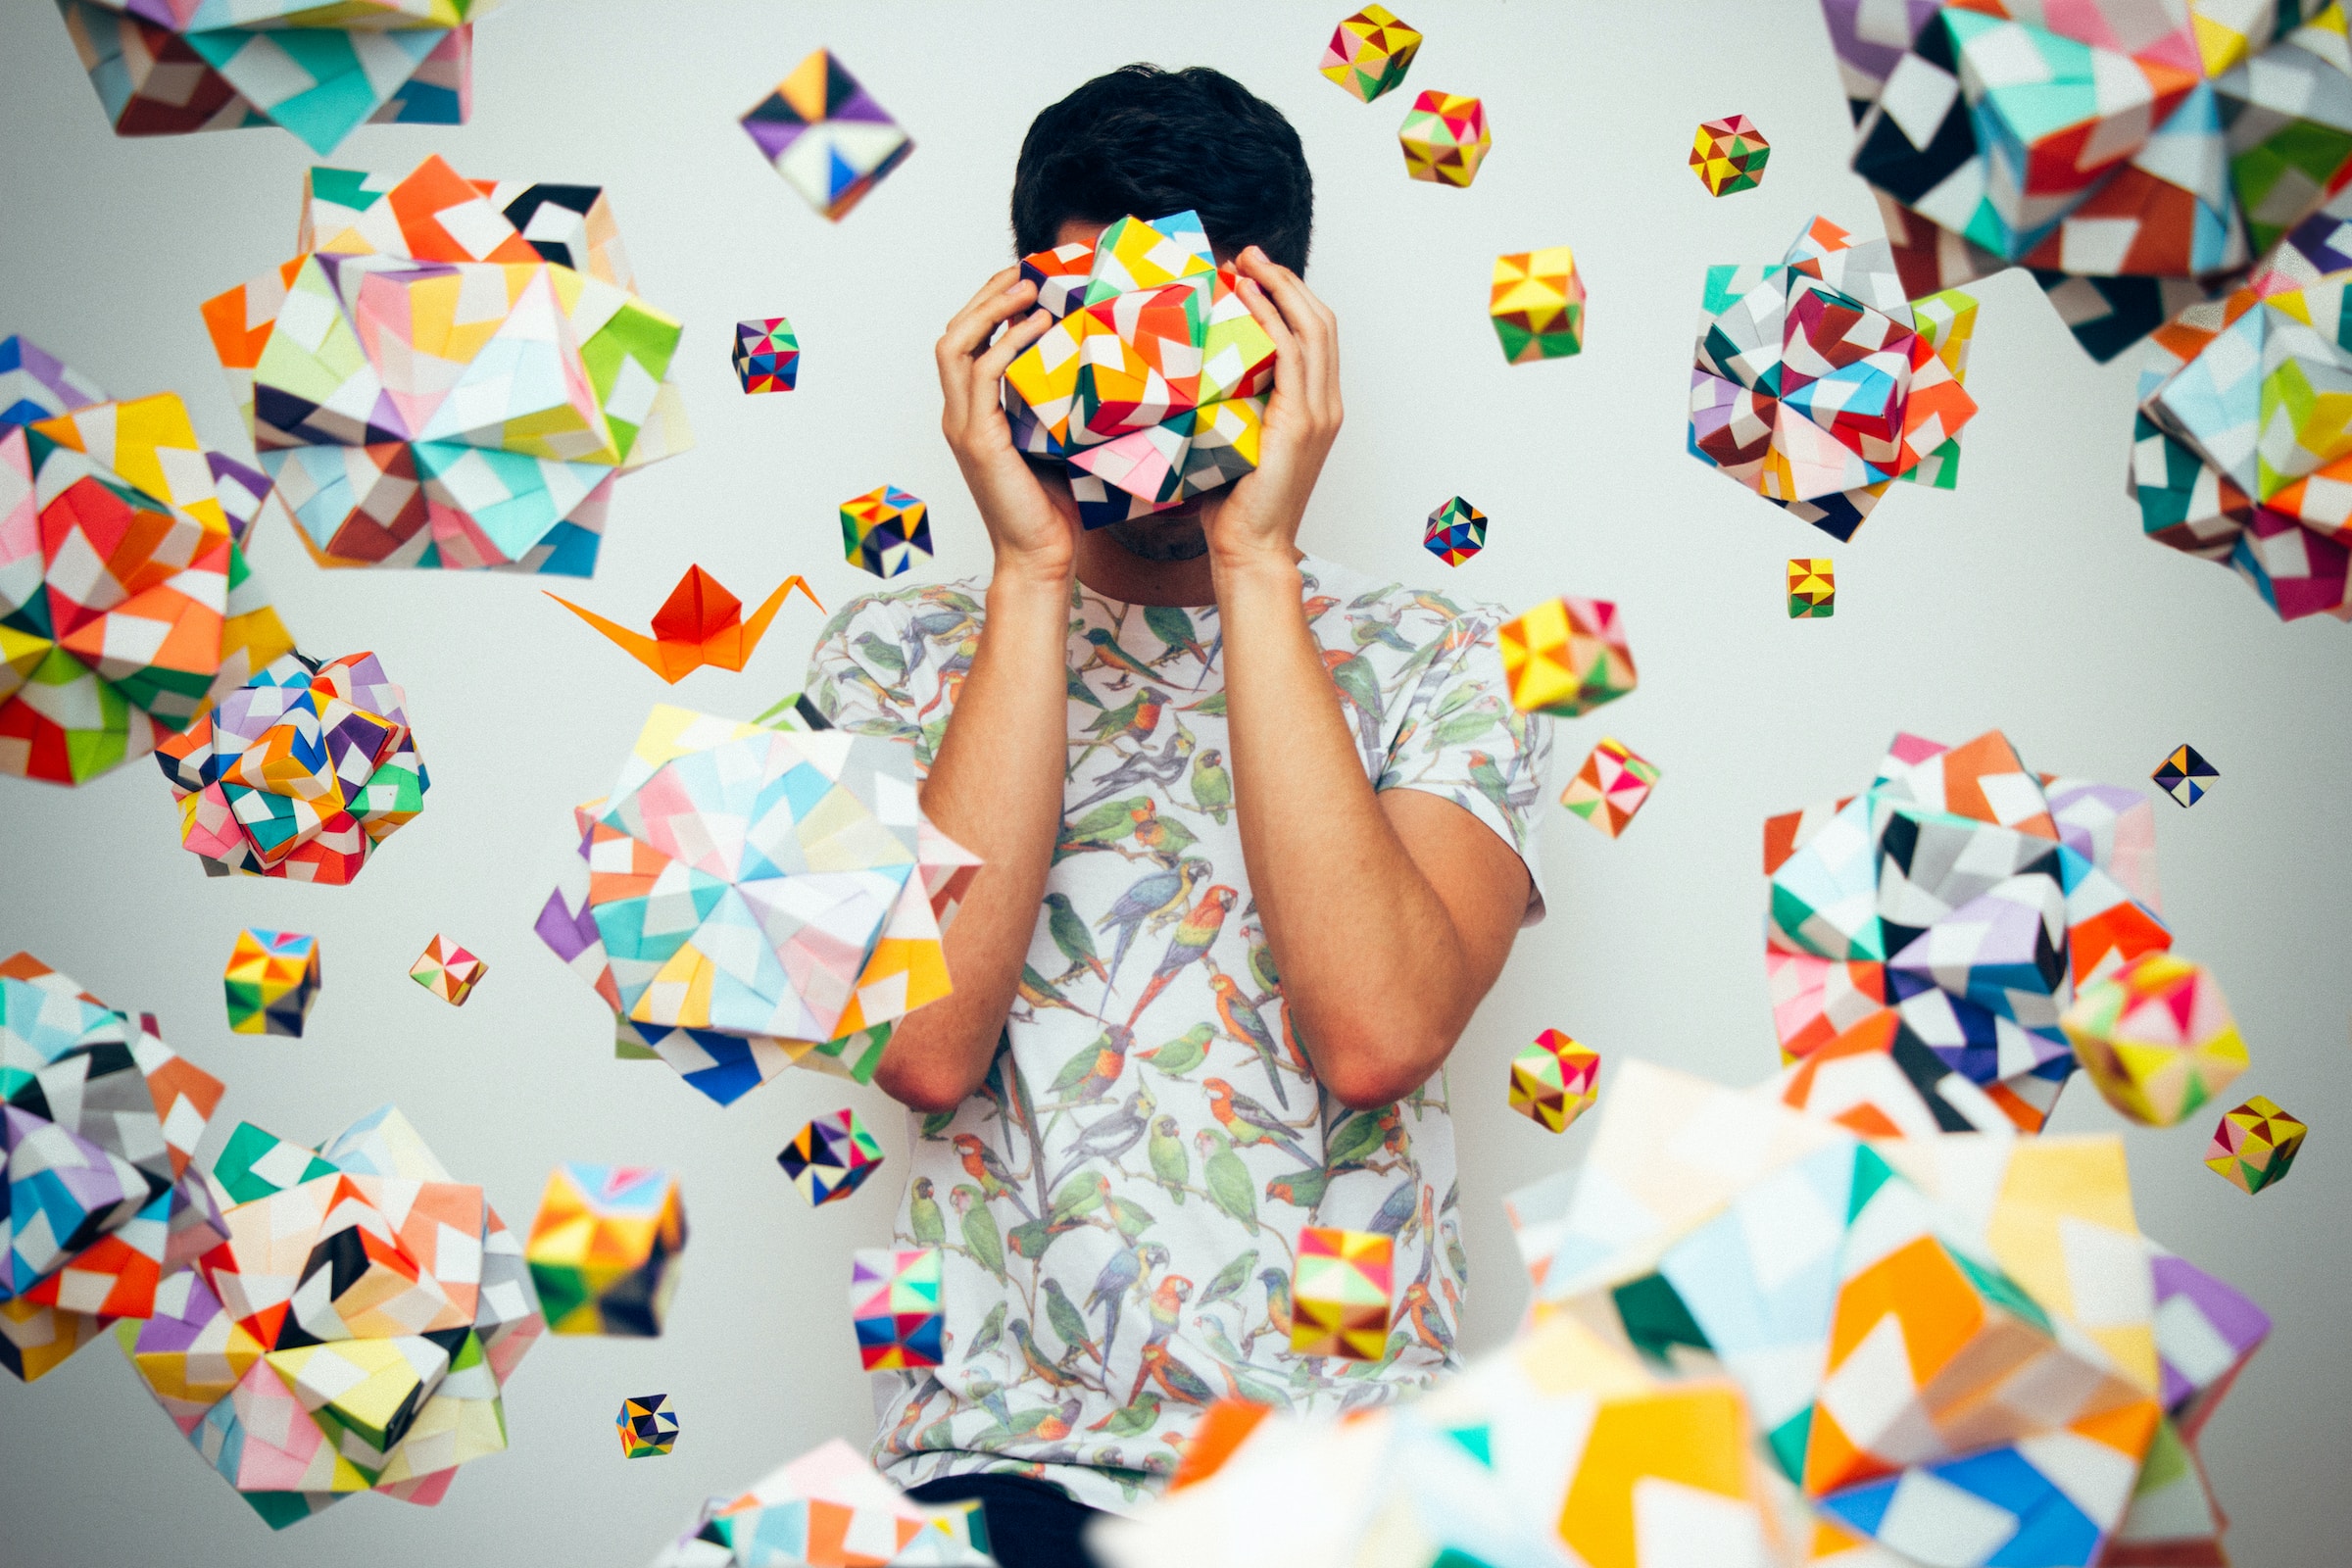 There are a lot of colourful cubes on a gray background. In the centre there is a man standing and closing his eyes with his hands and a colourful figure like a